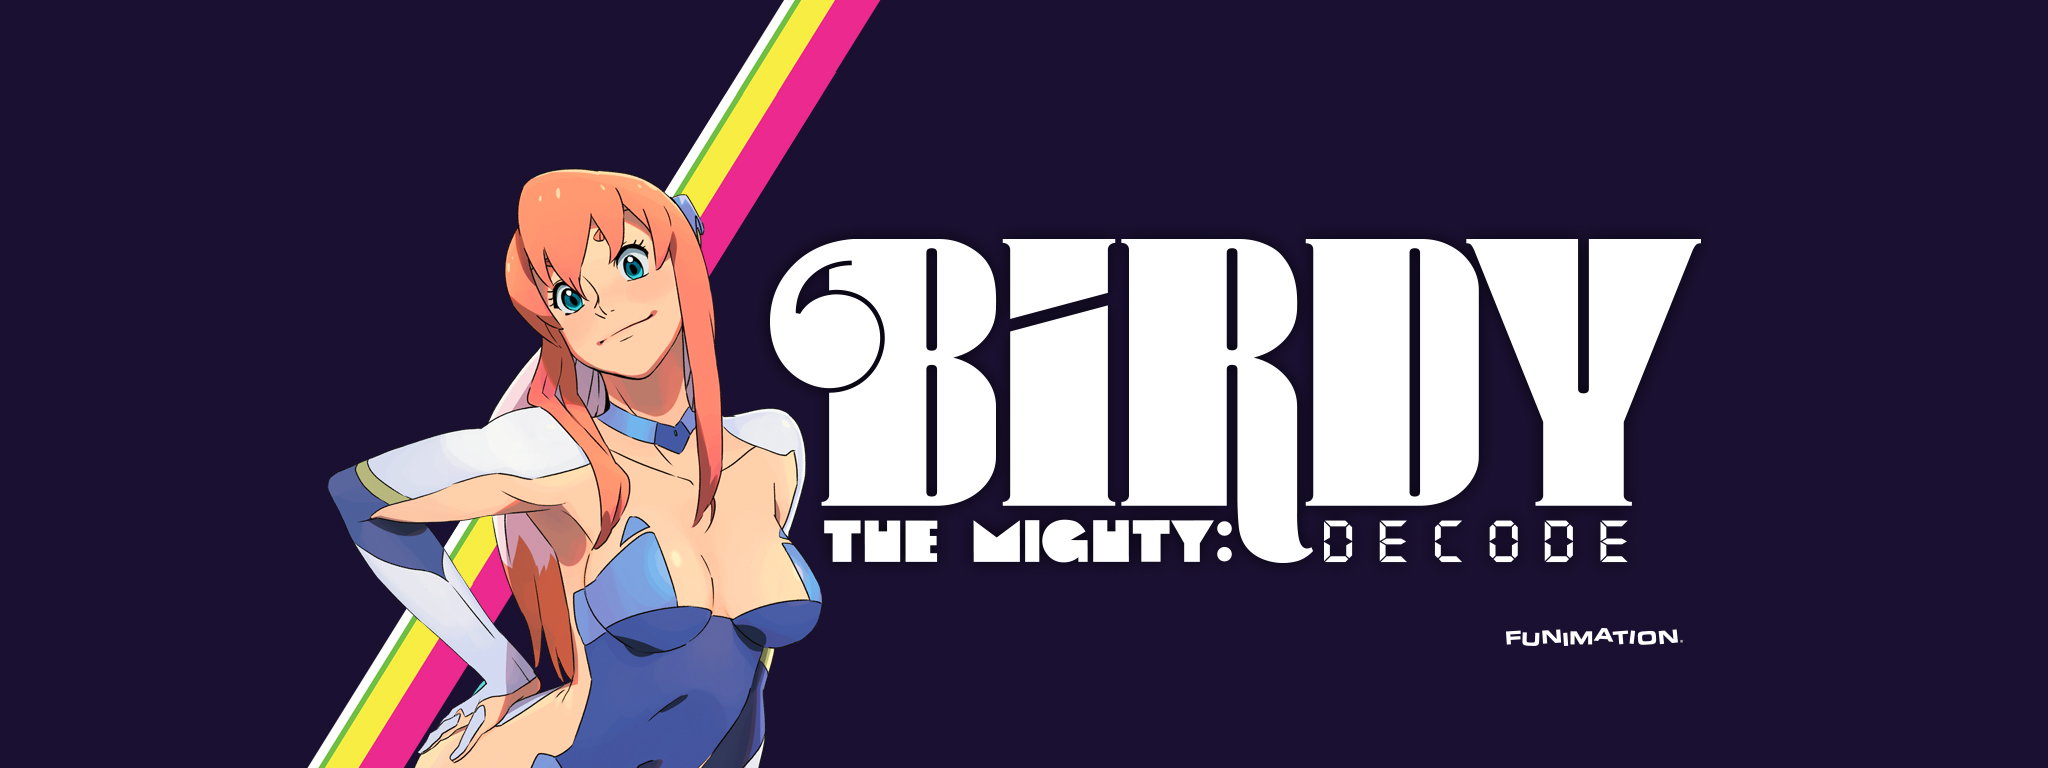 Birdy The Mighty: Decode #8